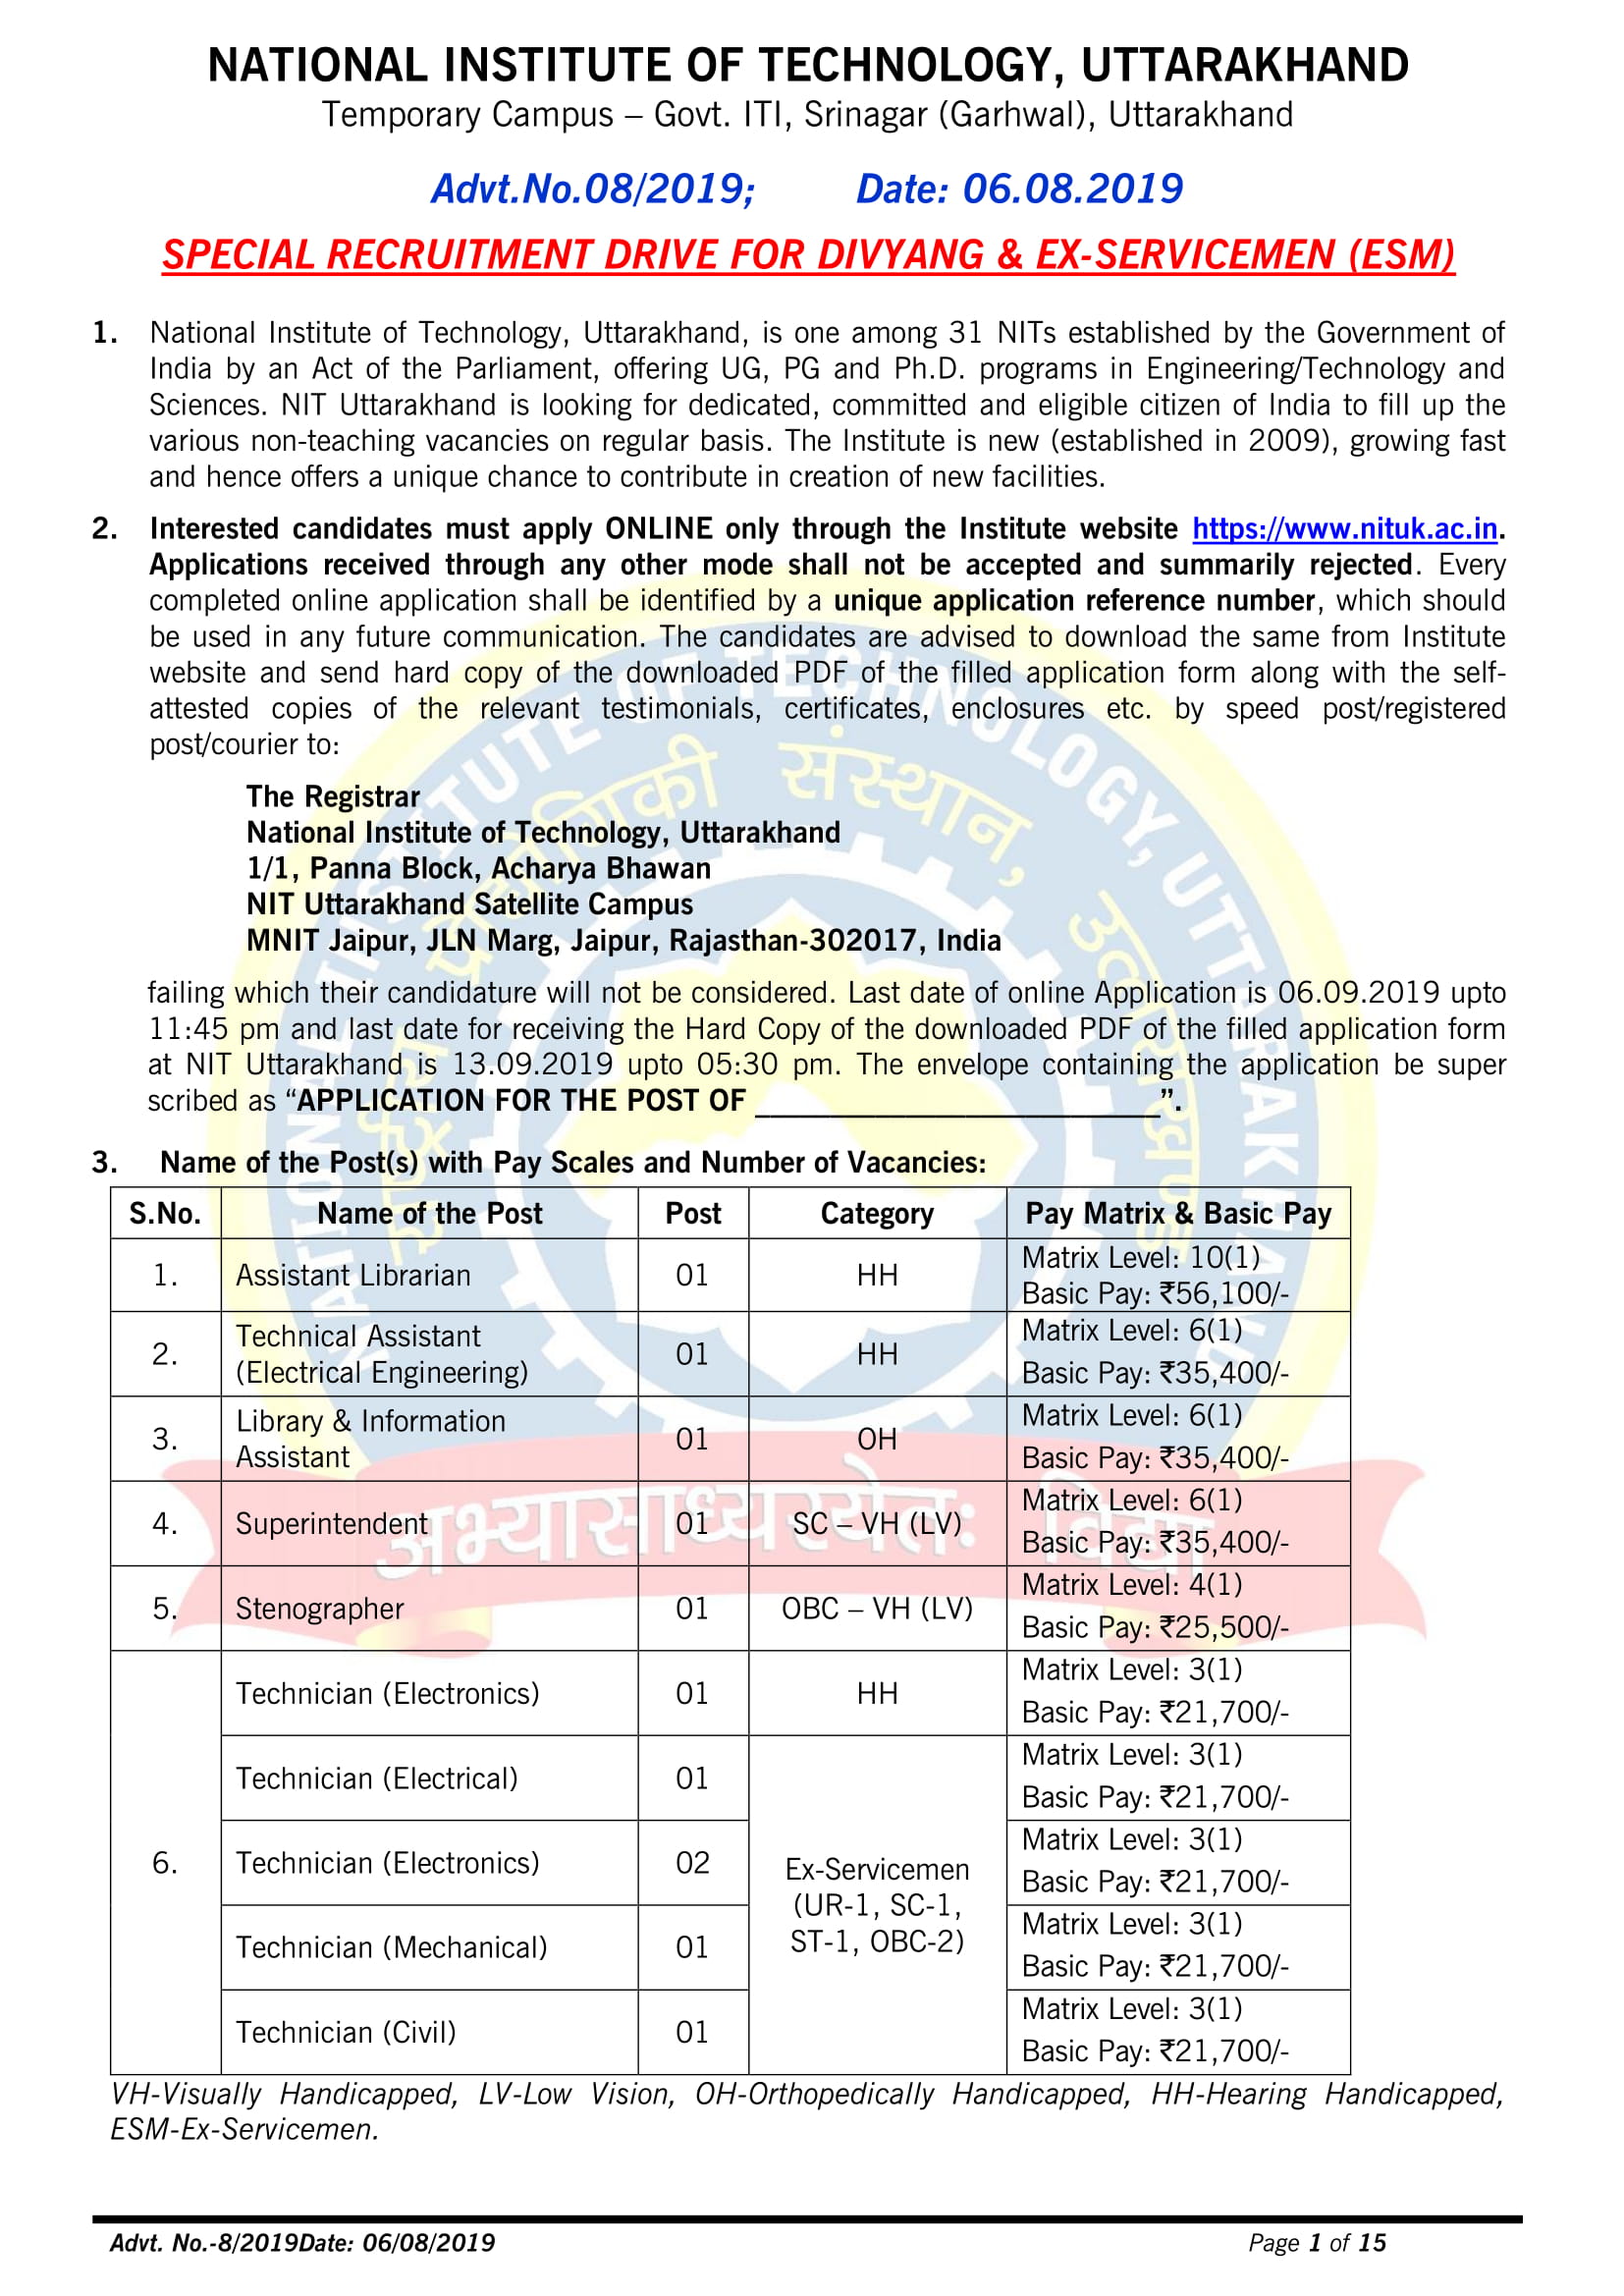 Advt. No.8 - Advertisement for PWD and Ex-Servicemen Posts - 2019-01.jpg